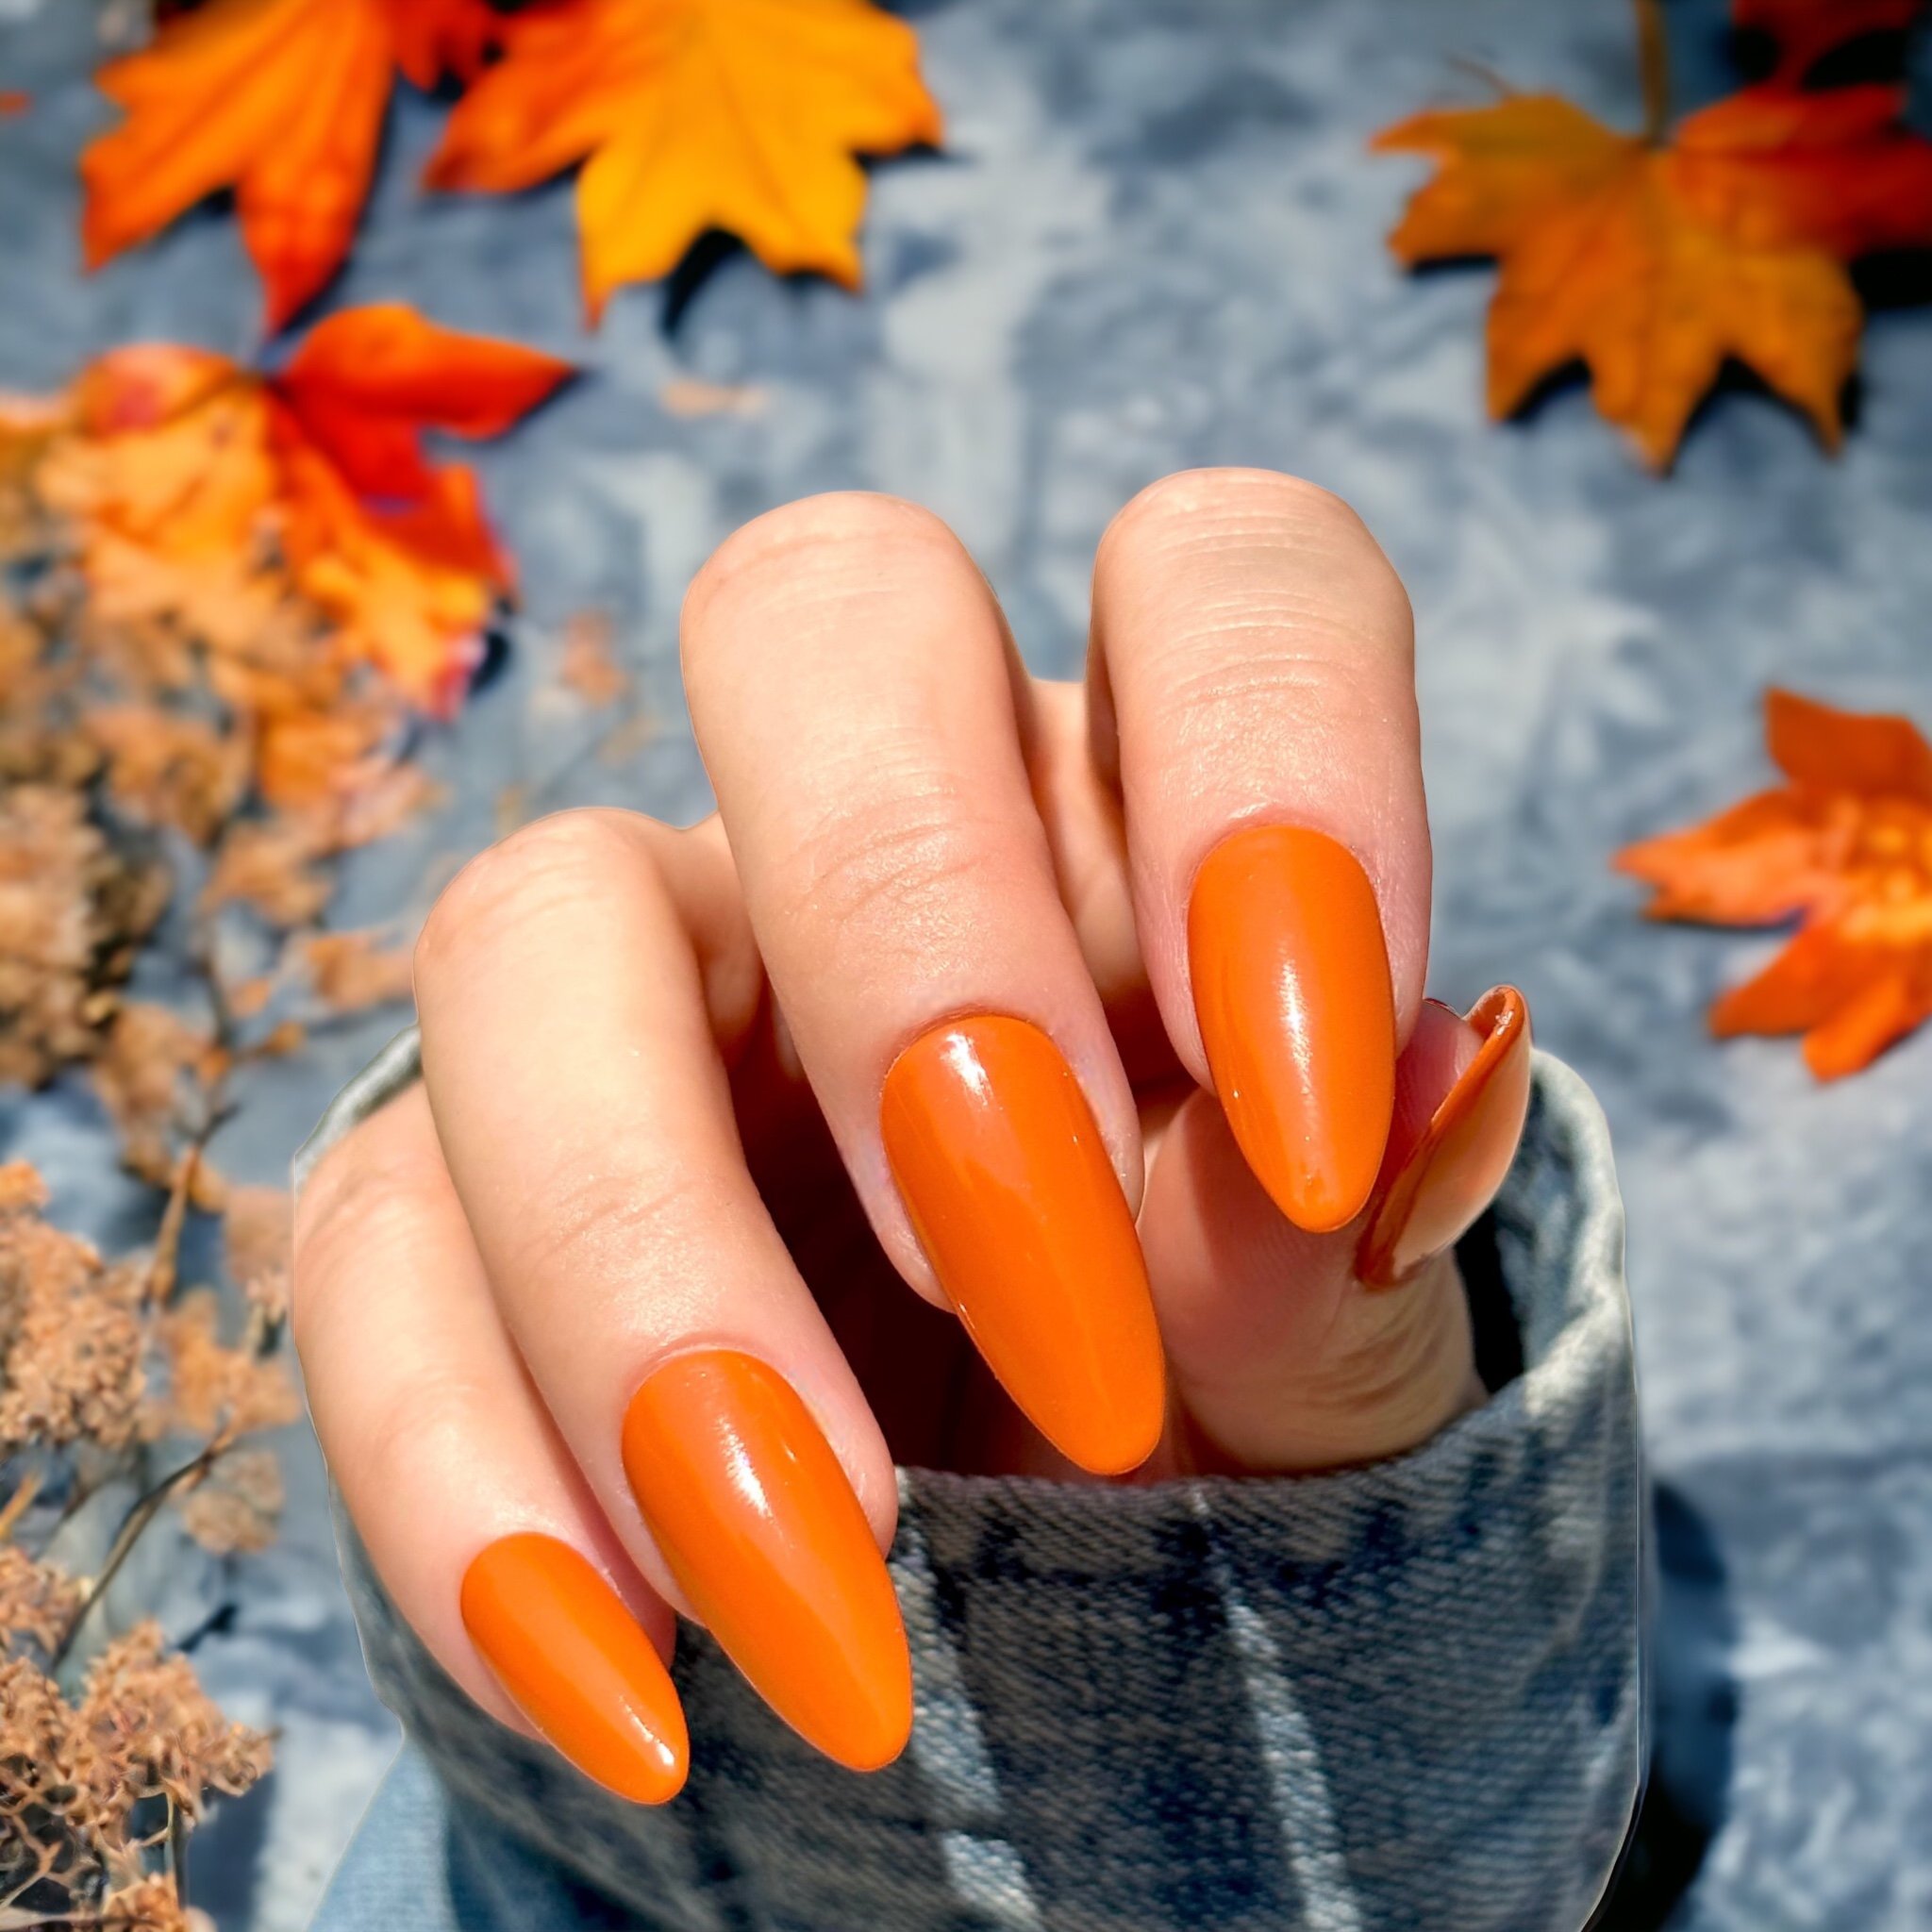 Ginger + Liz nail polish obsession – Perfection is Possible